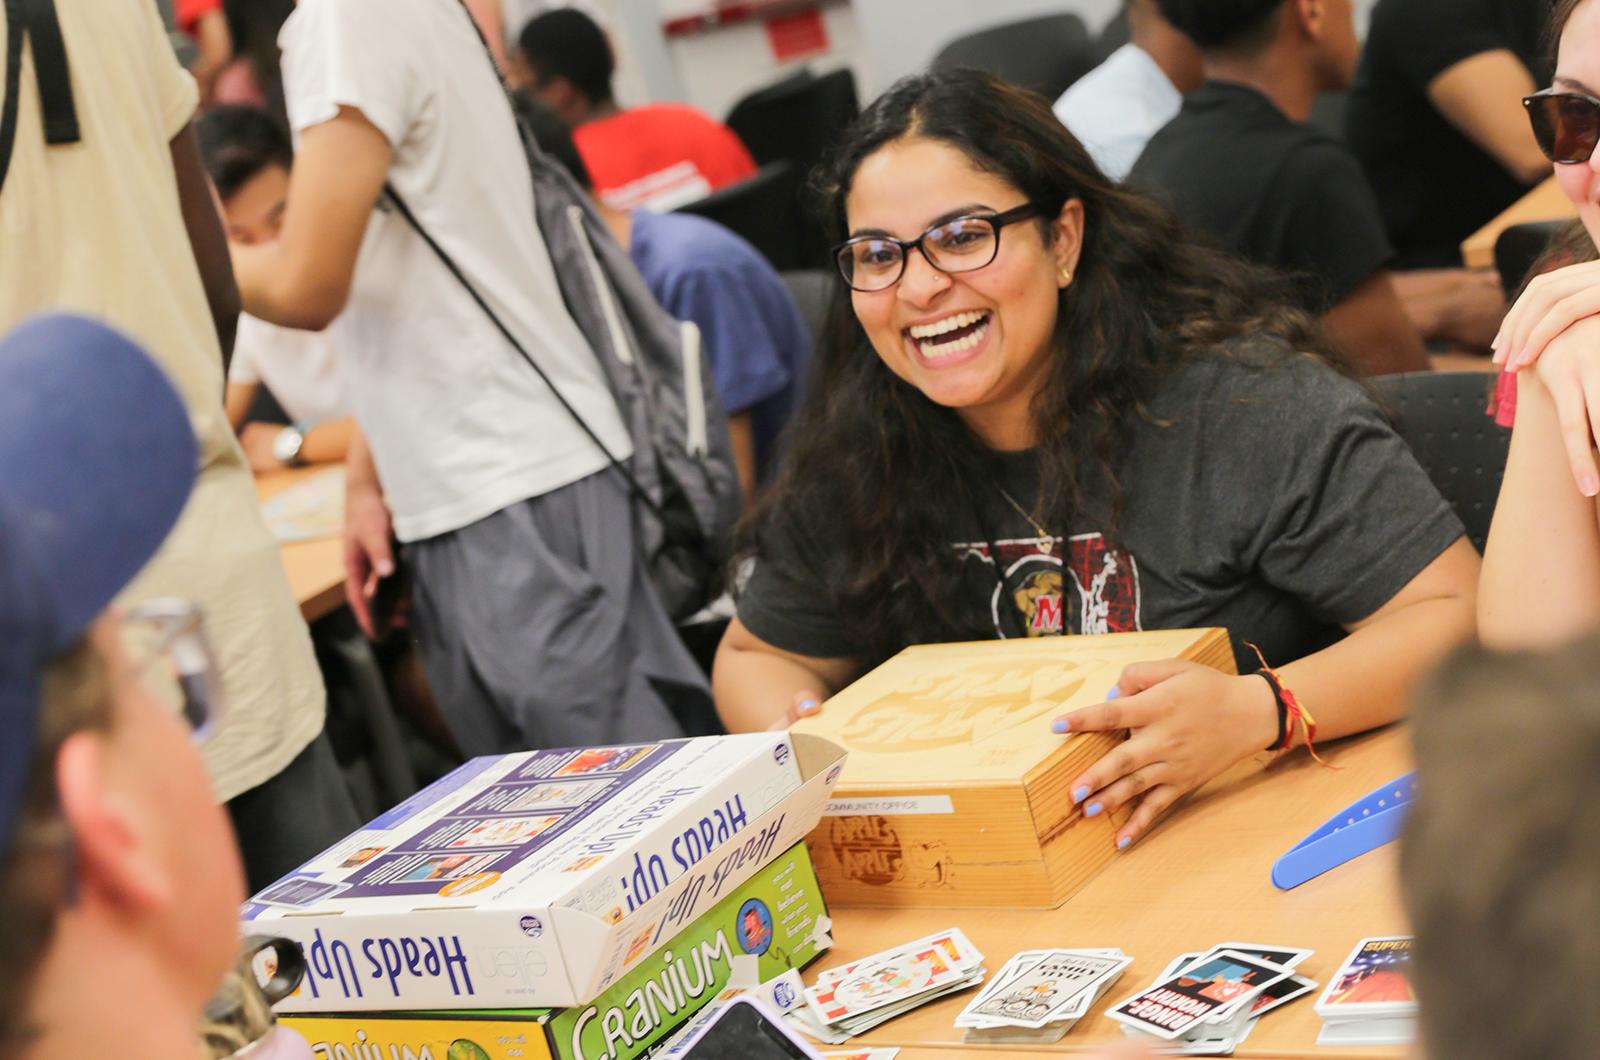 student laughing while playing a board game